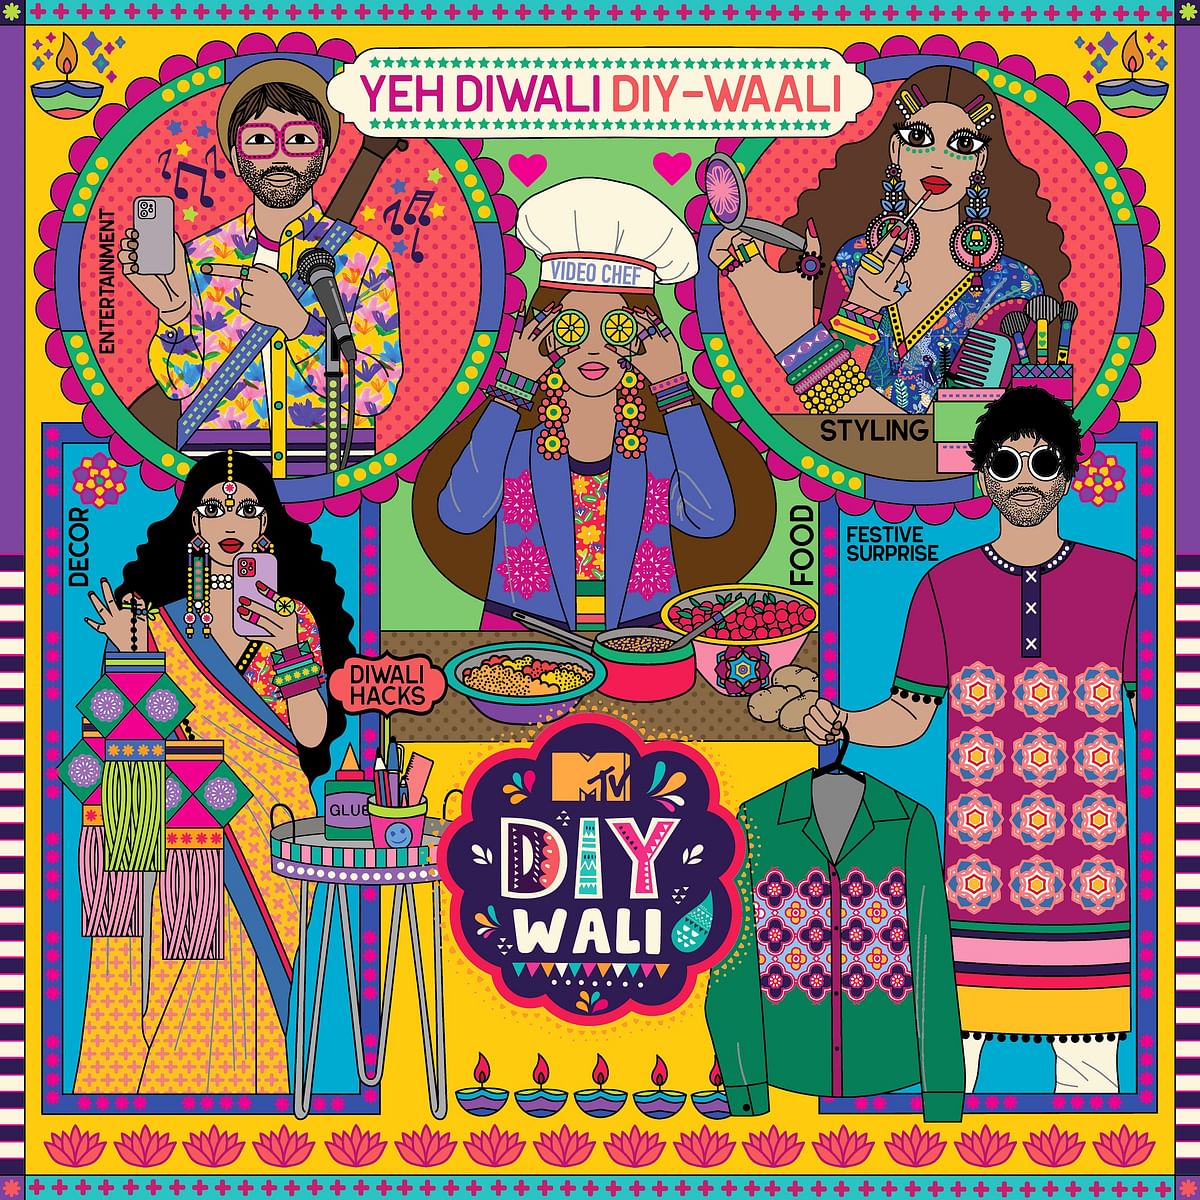 Have a #DIYwali Diwali this year with MTV India